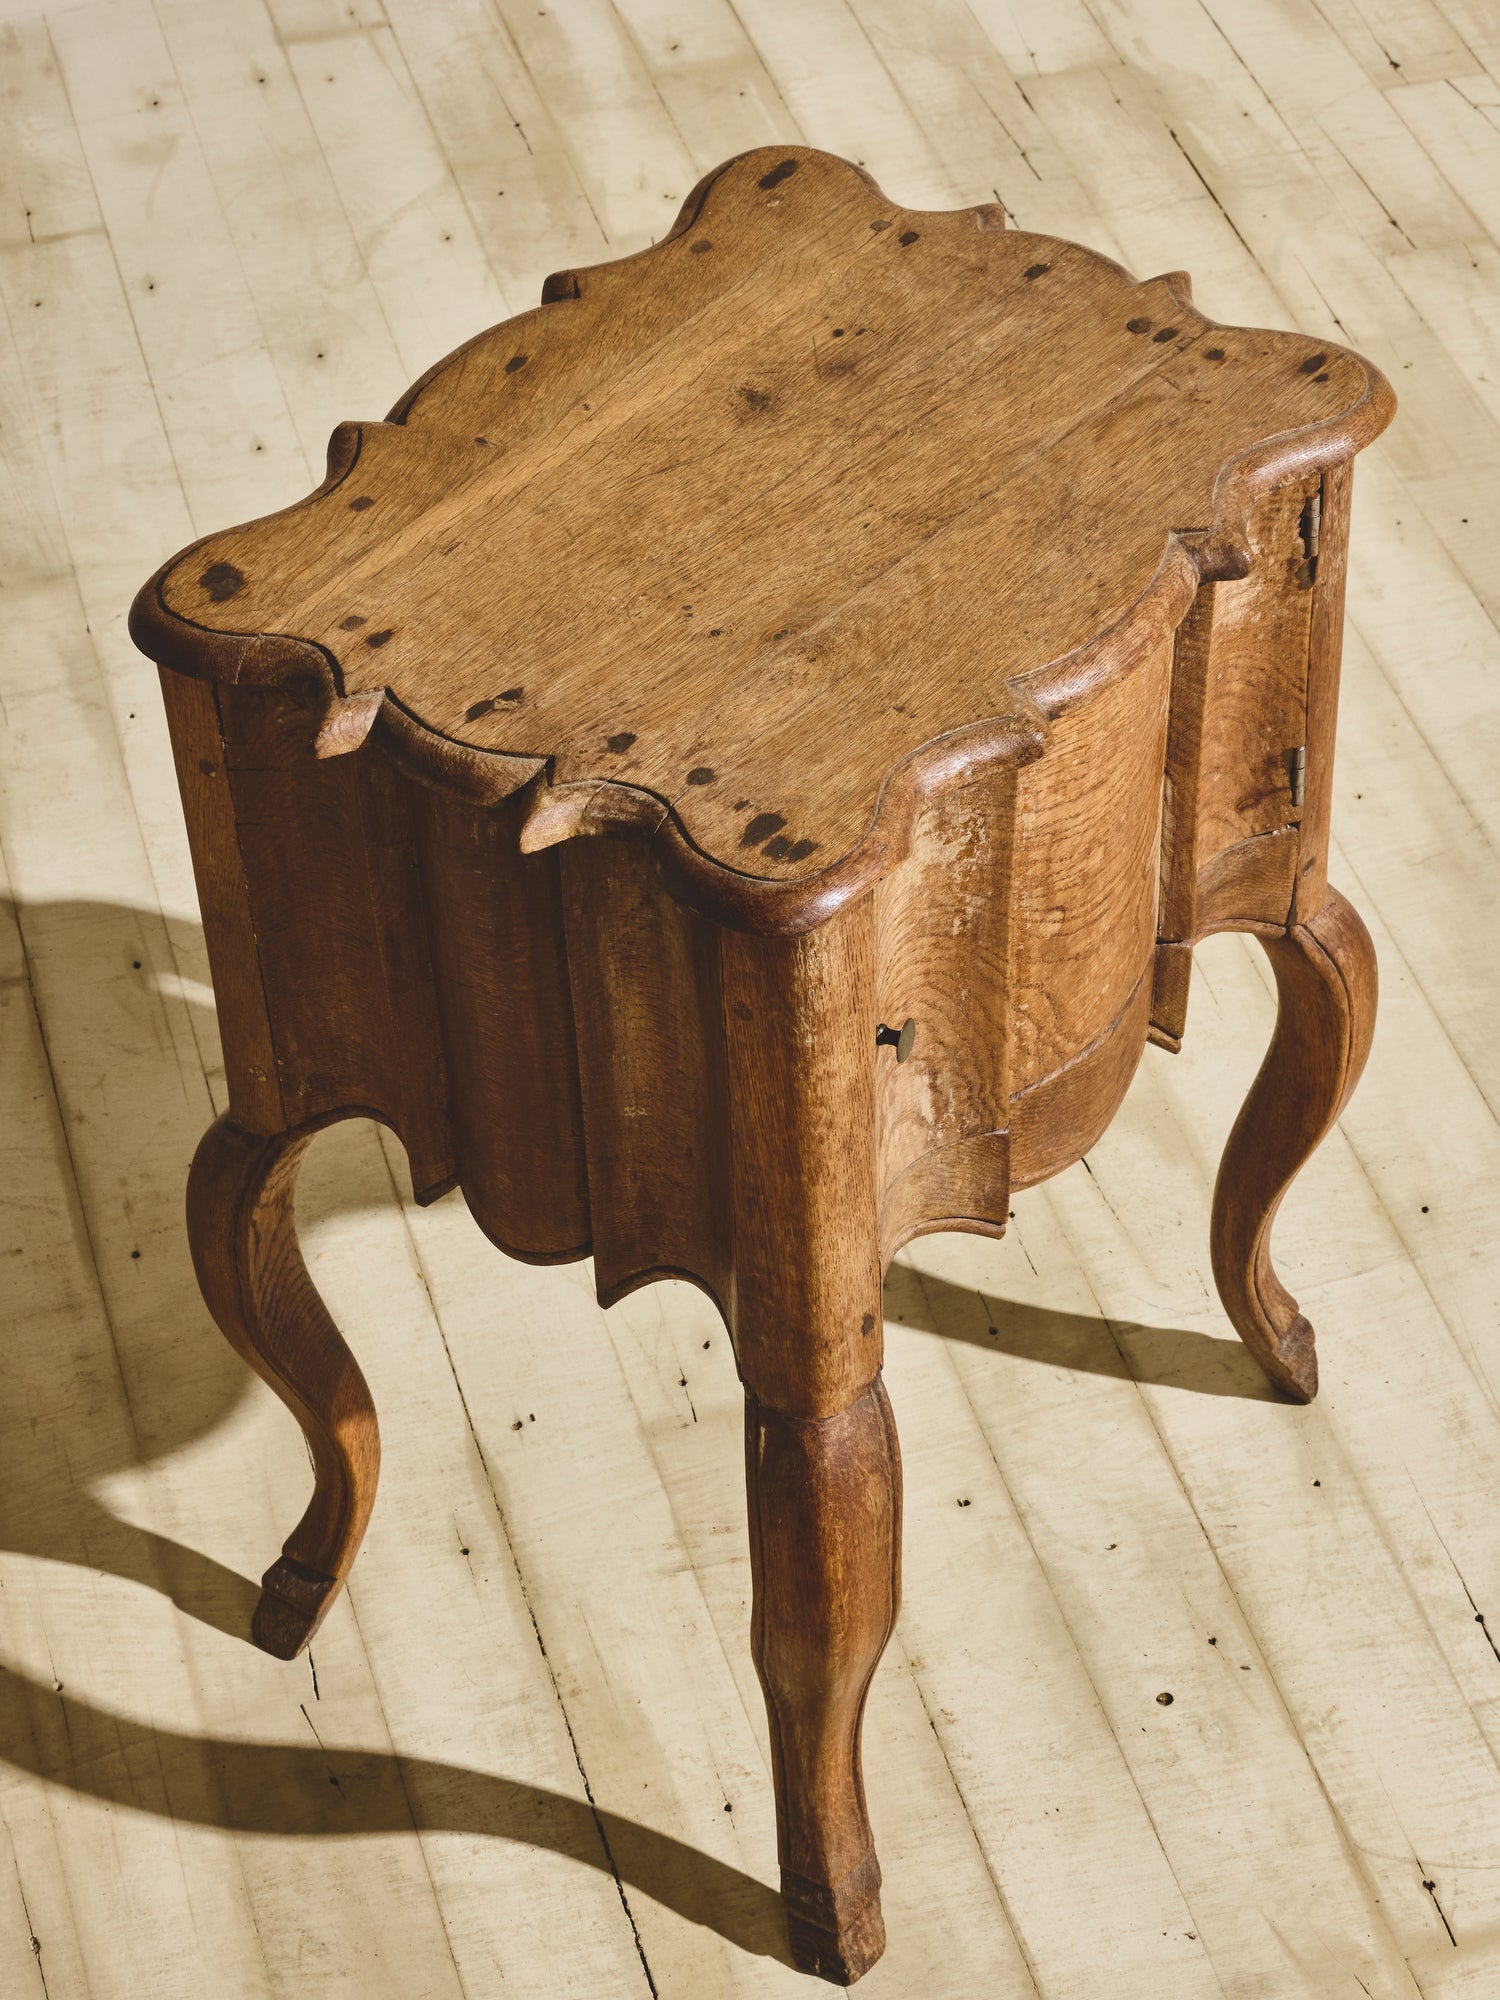 Baroque solid oak side table with fluted sides, wavy oak grain pattern, and hand sculpted XV French style legs. 